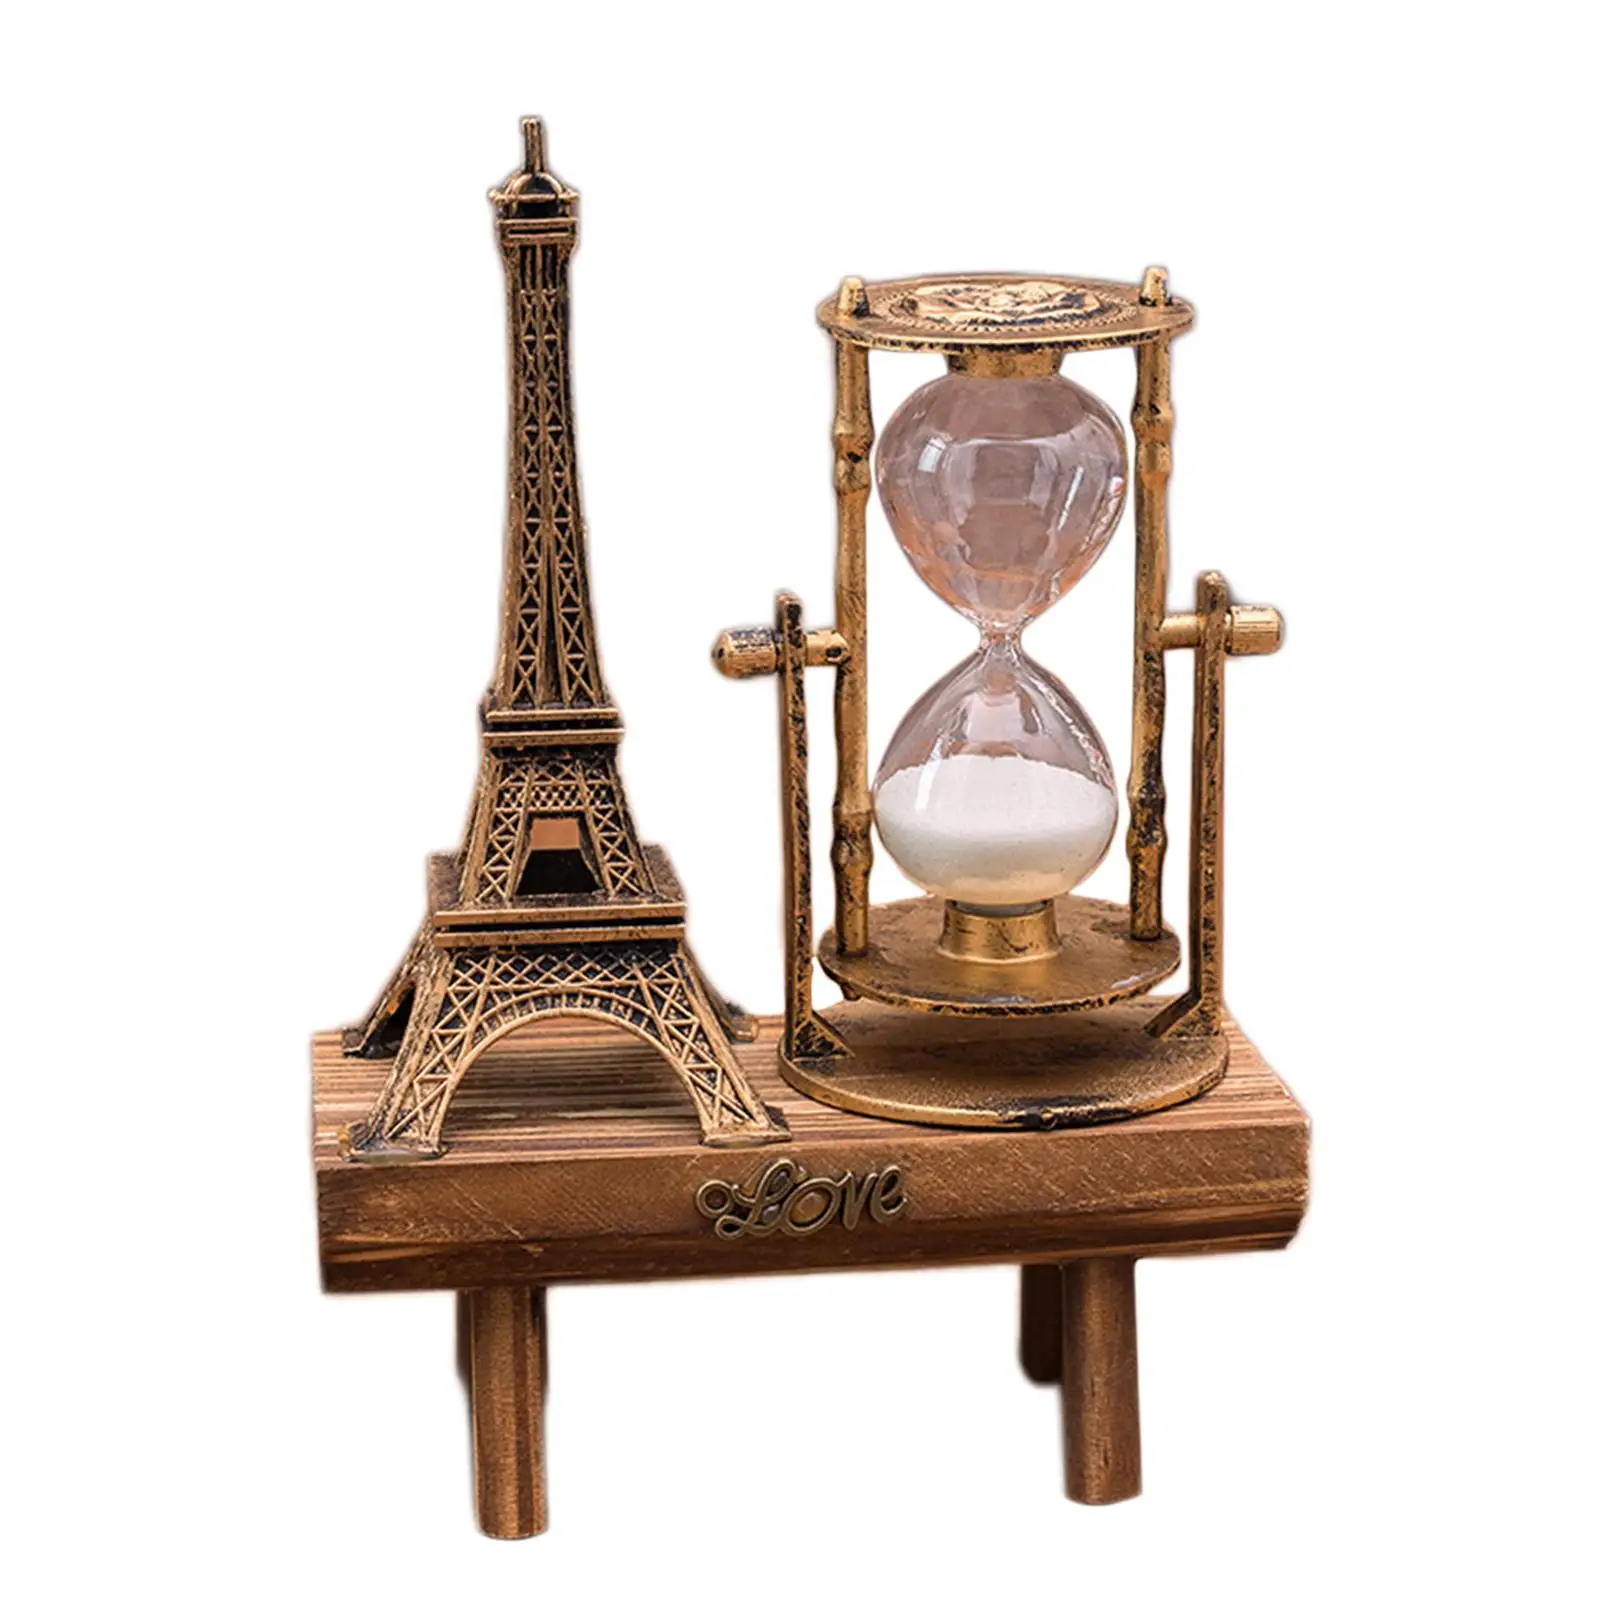 Iron Tower Hourglass Sand Timer Home Decoration Ornament Gift Wooden Base